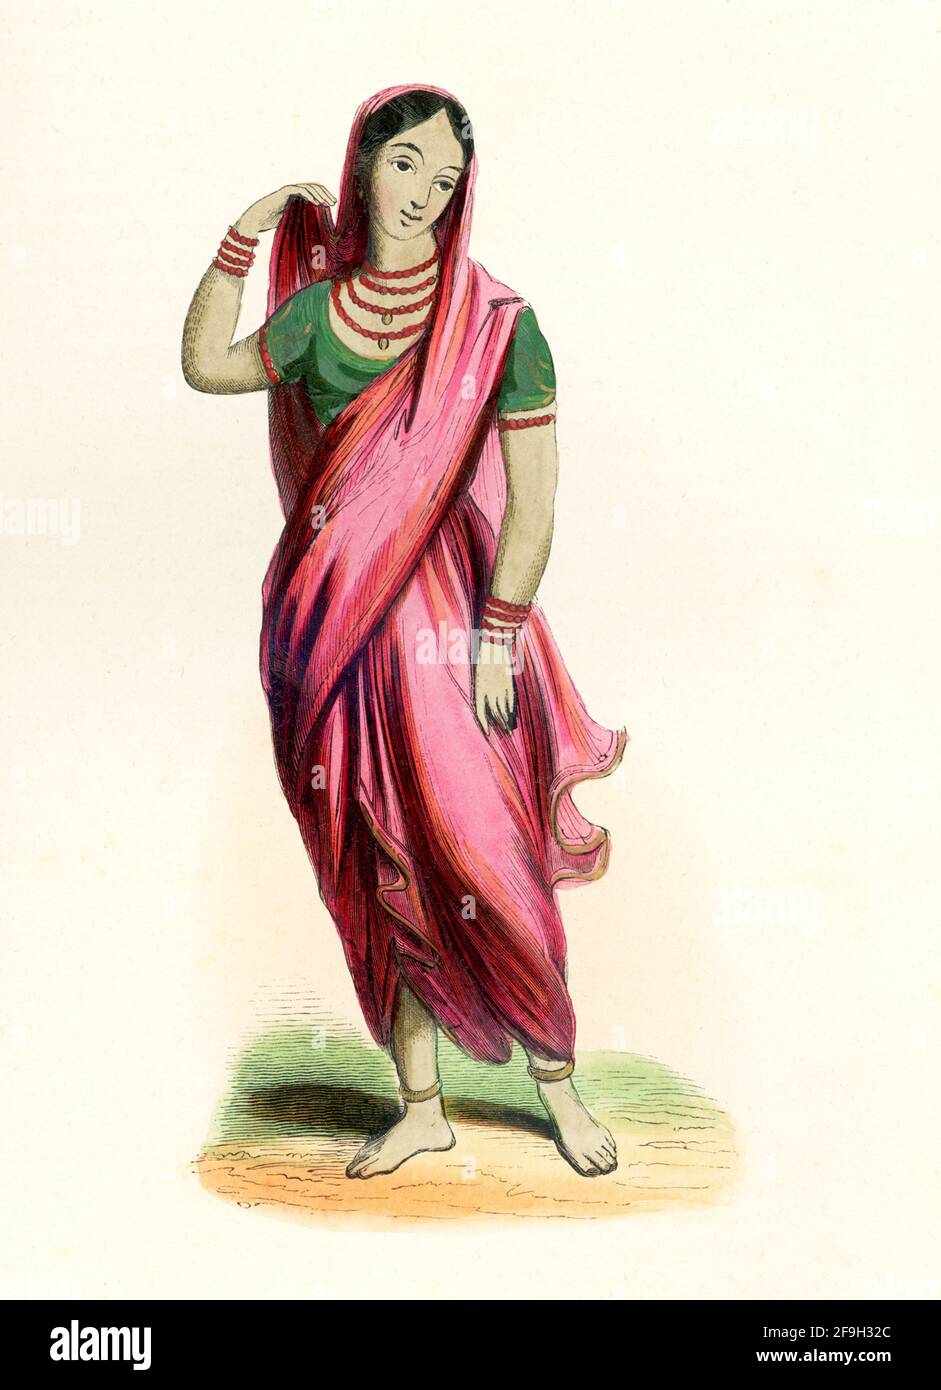 This 1840s illustration shows a young Indian or Hindustani girl of the upper class. Stock Photo